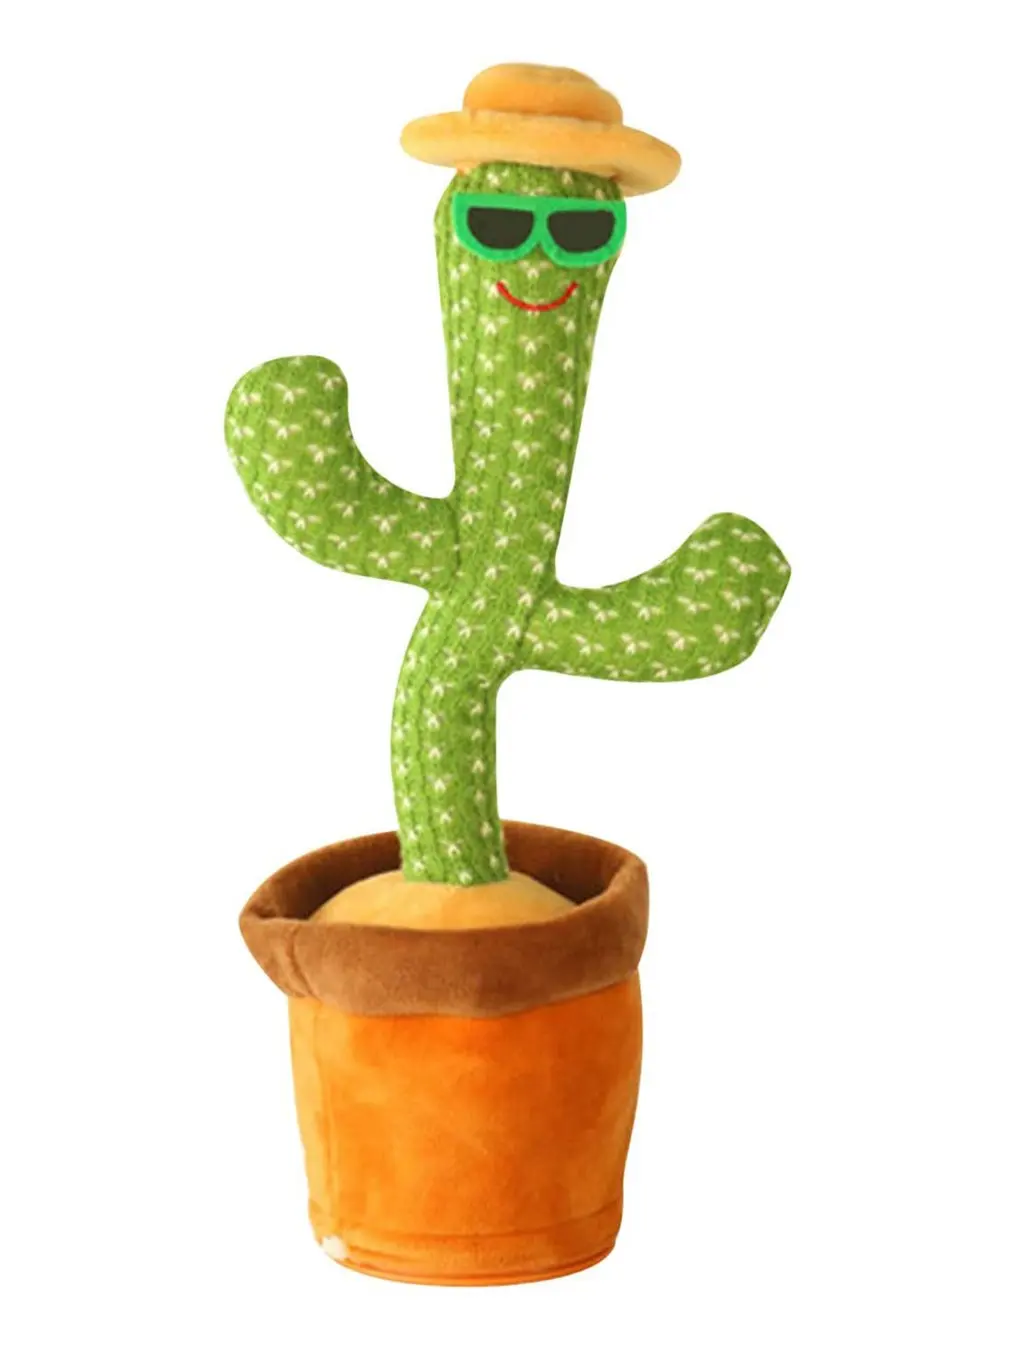 

Singing Dancing Cactus Toy Songs Learning Speak Luminous Fidget Toy Only One In The Head I Have Early Childhood Education Toy